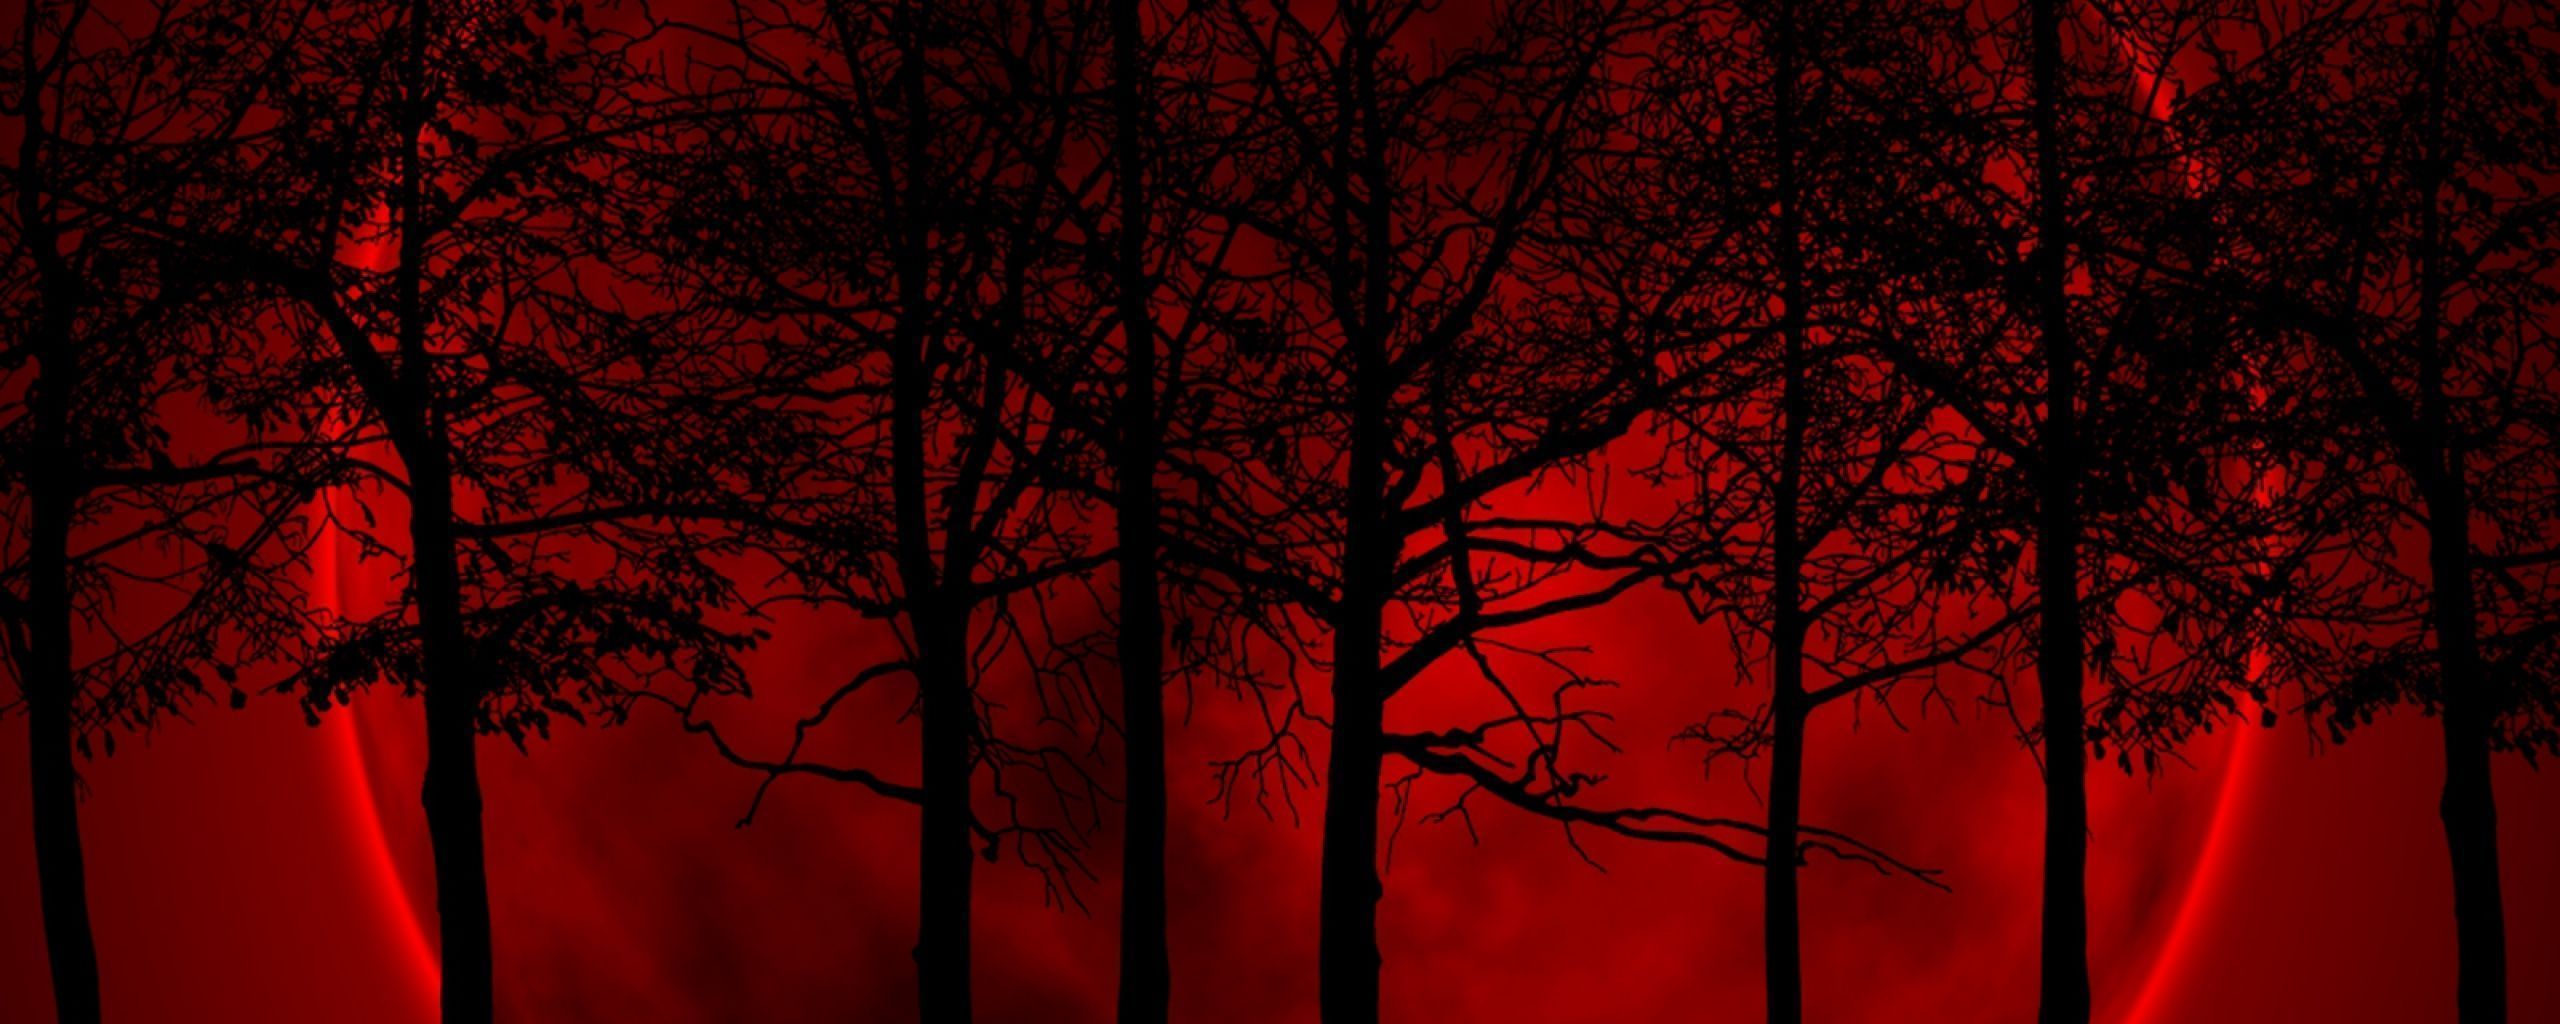 Download Wallpaper 2560x1024 Trees, Sky, Eclipse, Night, Blood ...